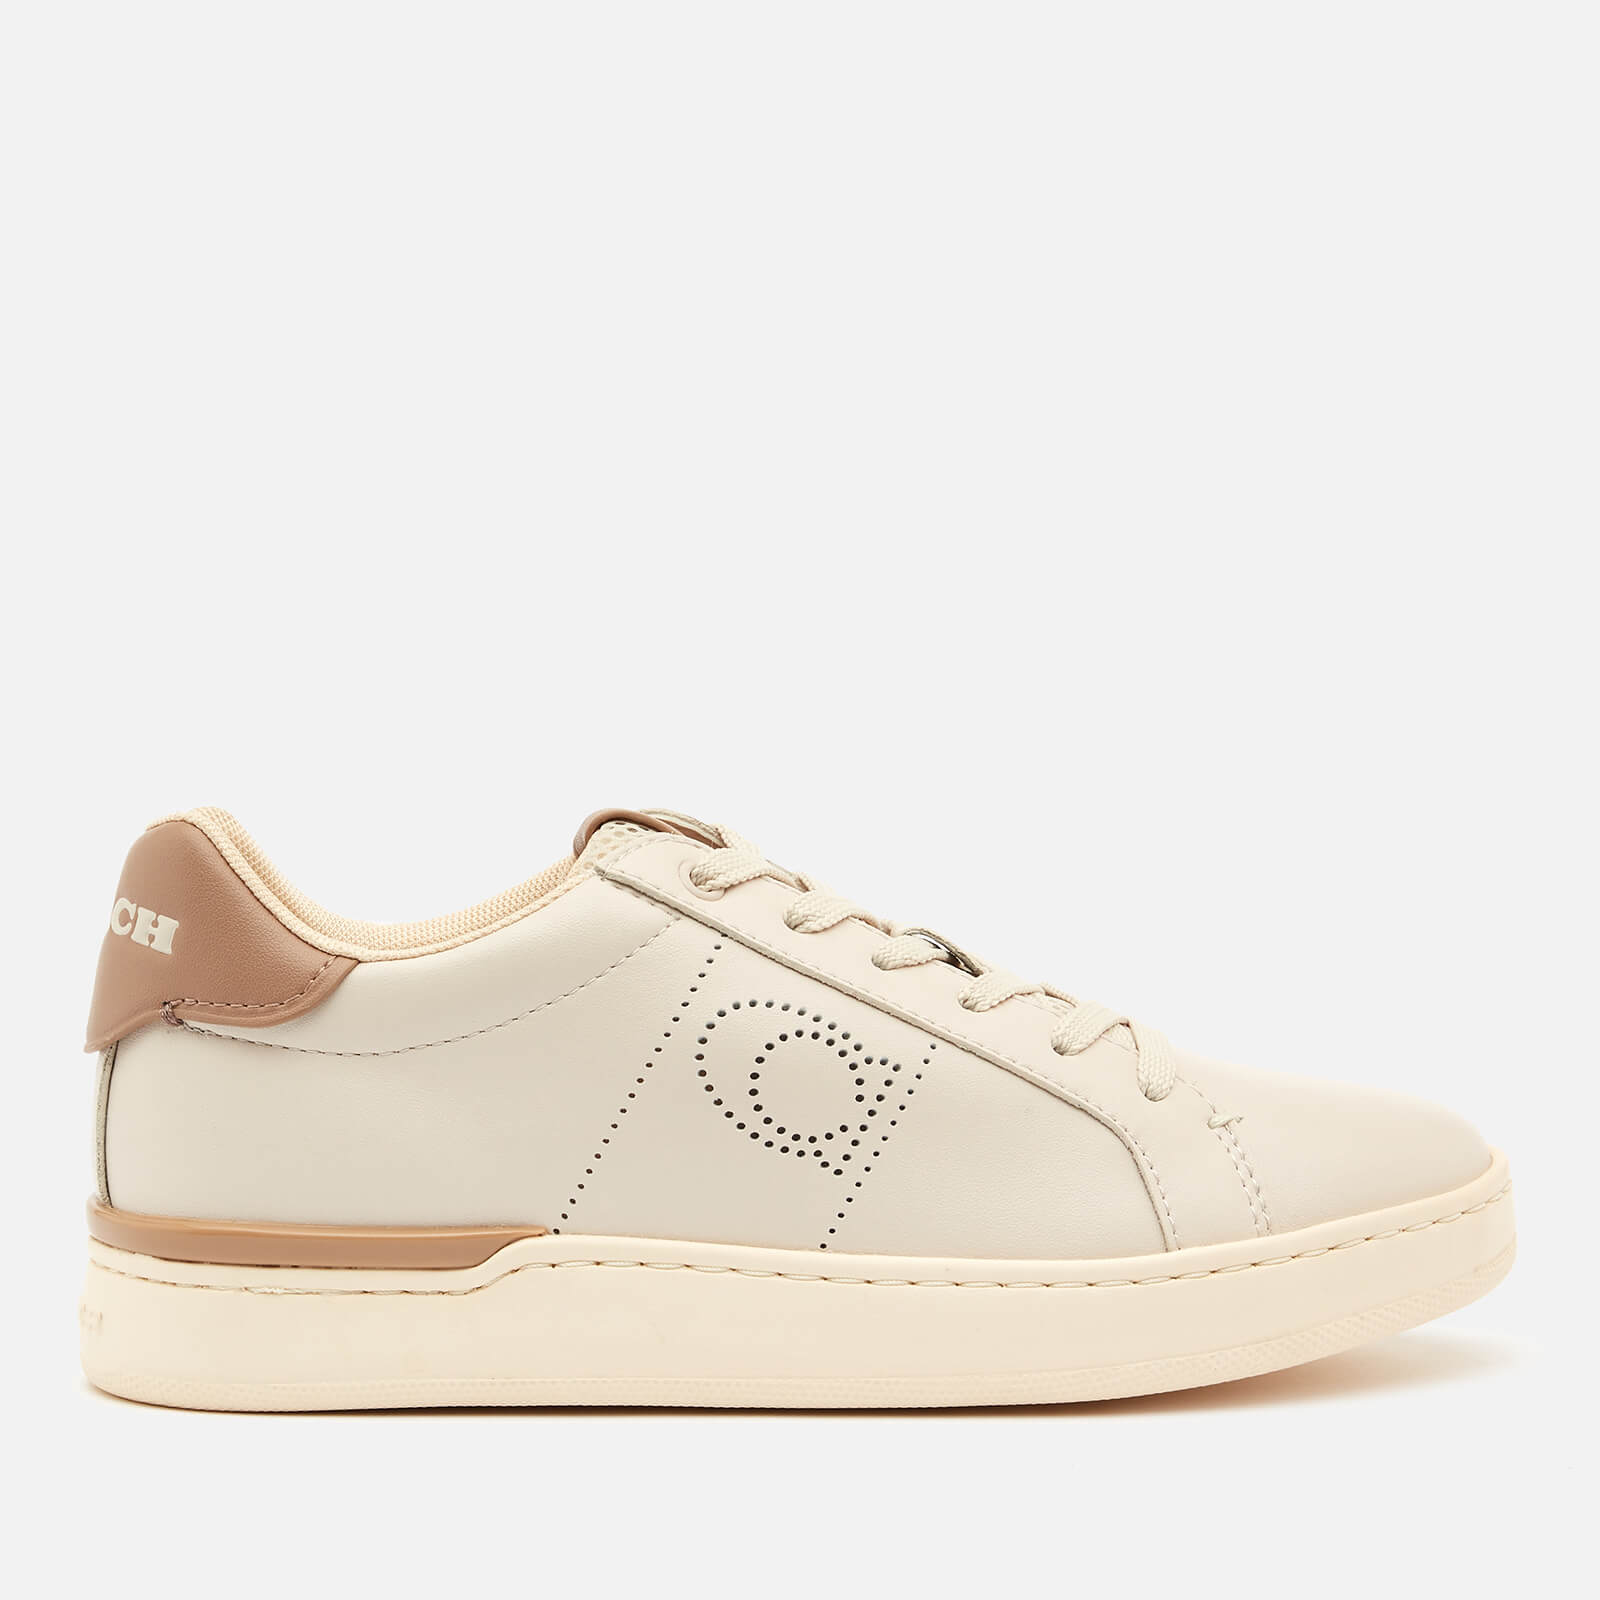 Coach Women's ADB Leather/Suede Cupsole Trainers - Chalk/Taupe - UK 8